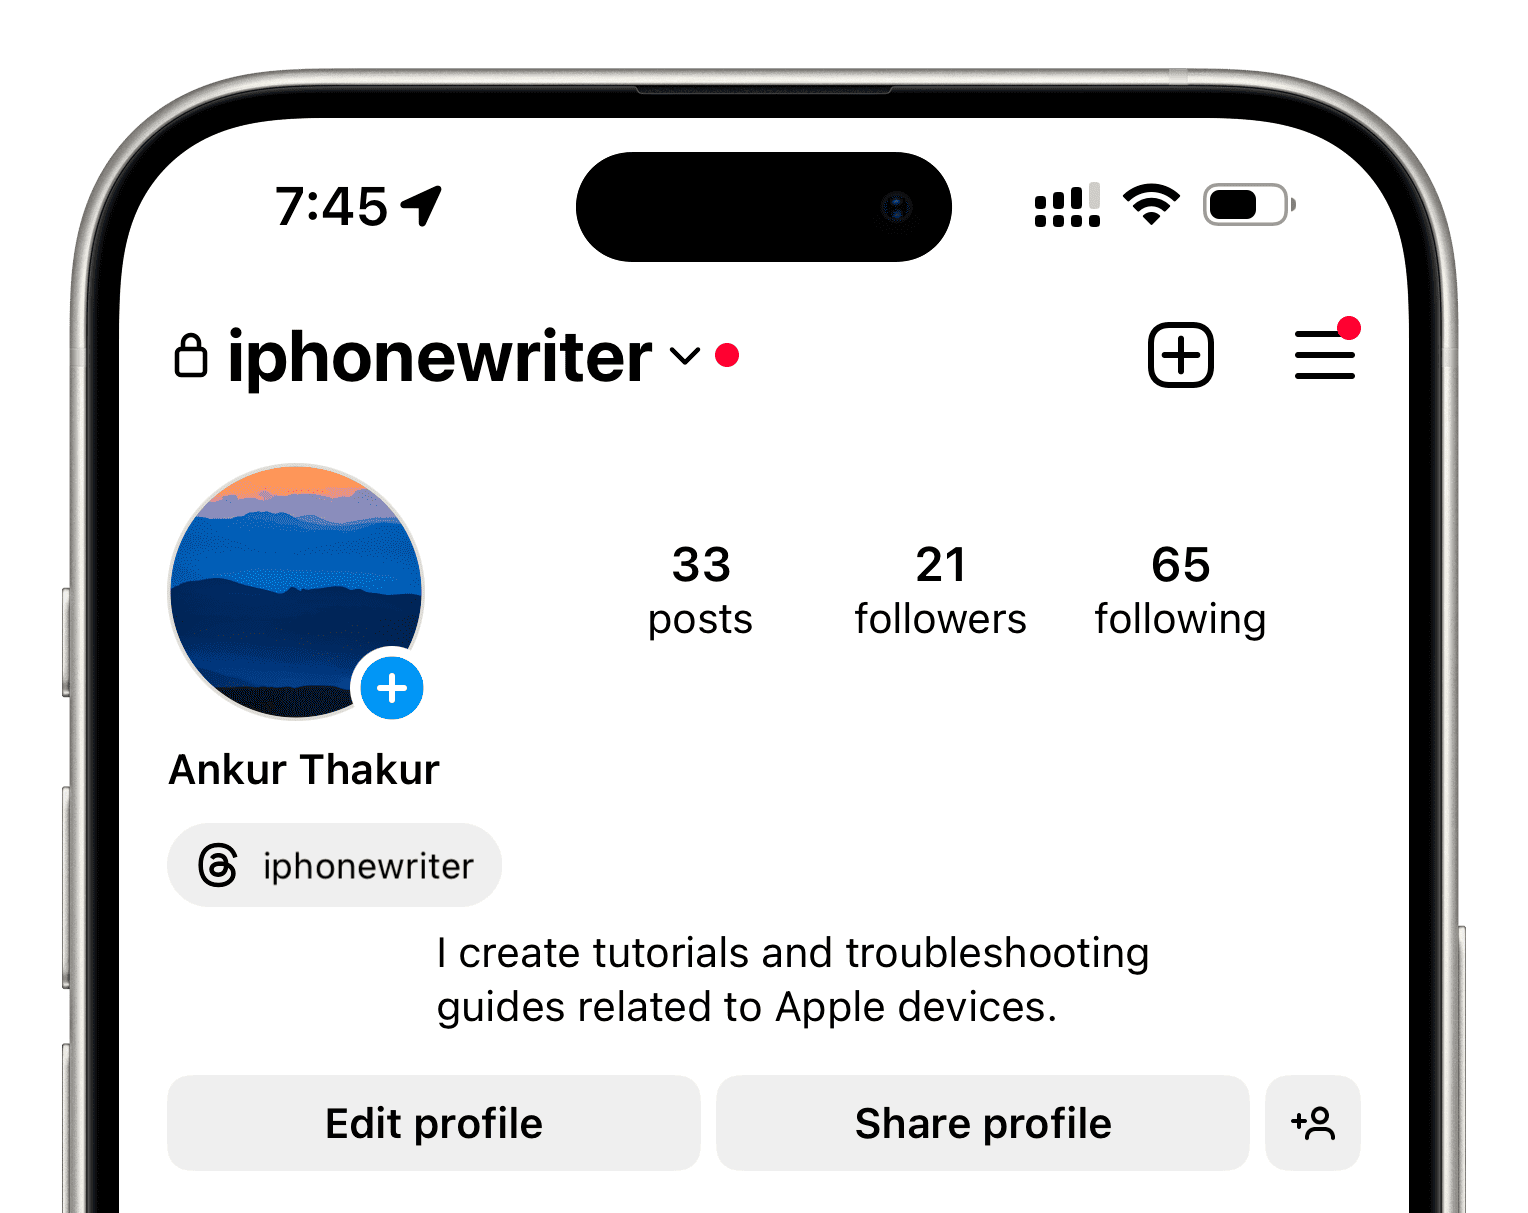 Instagram bio text in middle